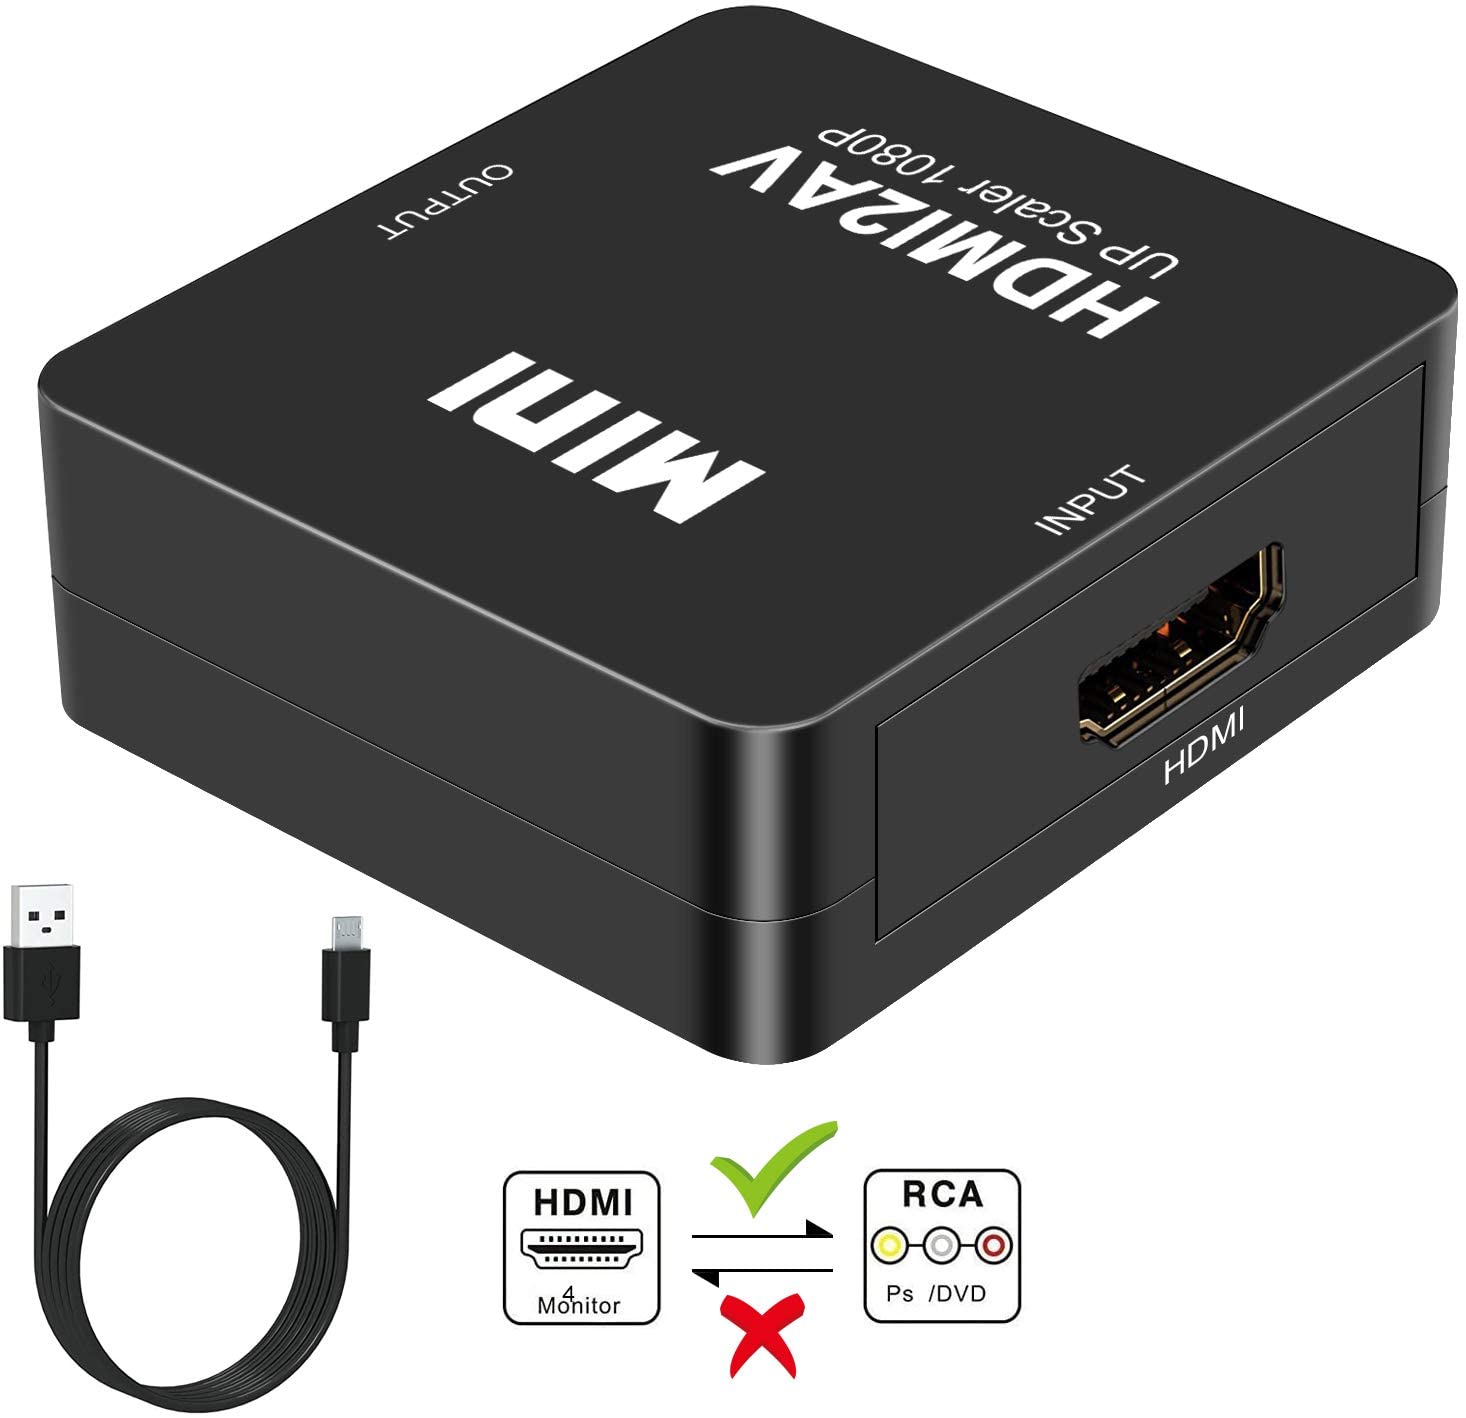 DIGITNOW HDMI to RCA, DIGITNOW 1080P Mini HDMI to Analogue AV 3RCA CVBS Composite HD Video Audio Converter Adpter Supports PAL/NTSC for PC Laptop PS4 PS3 Xbox Blue-Ray HDTV Camera DVD